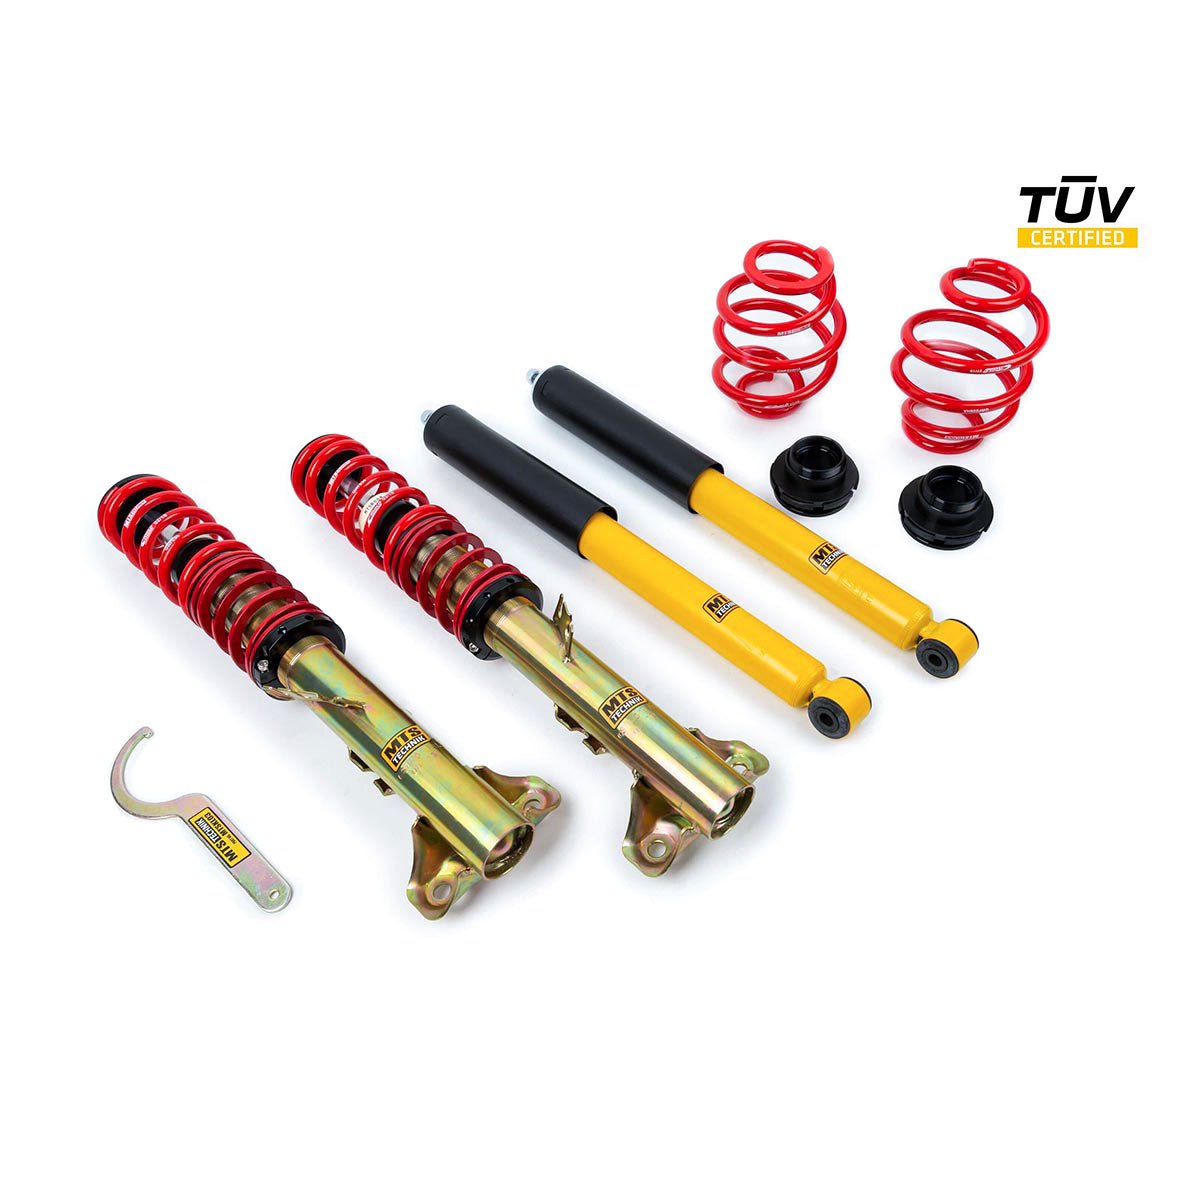 MTS TECHNIK coilover kit STREET BMW Z3 Coupe (with TÜV) - PARTS33 GmbH